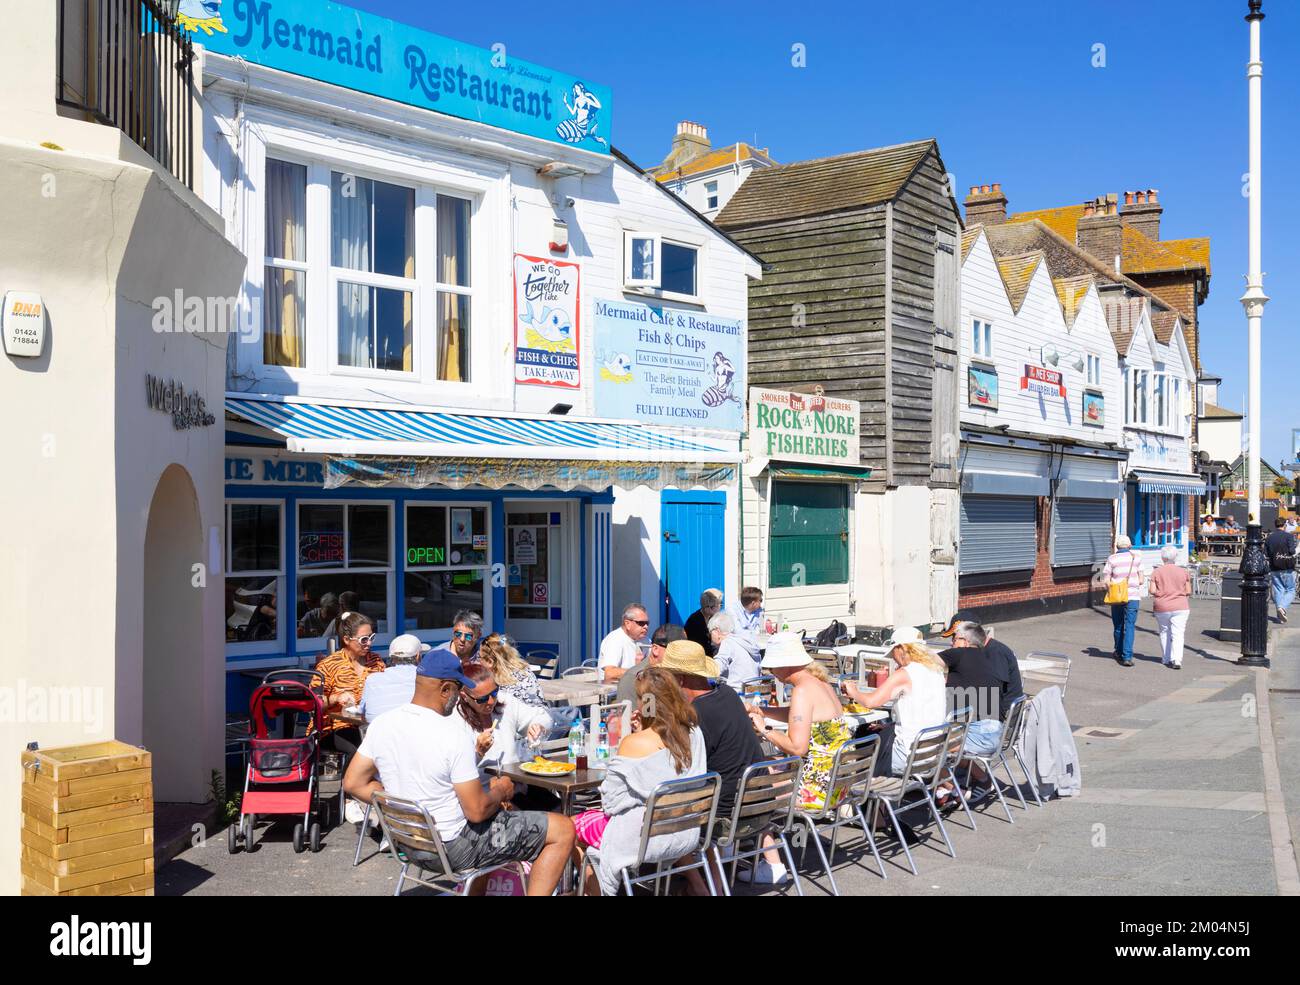 Hastings Old Town People eating fish and chips outside the Mermaid restaurant Hastings old Town Hastings East Sussex England UK GB Europe Stock Photo